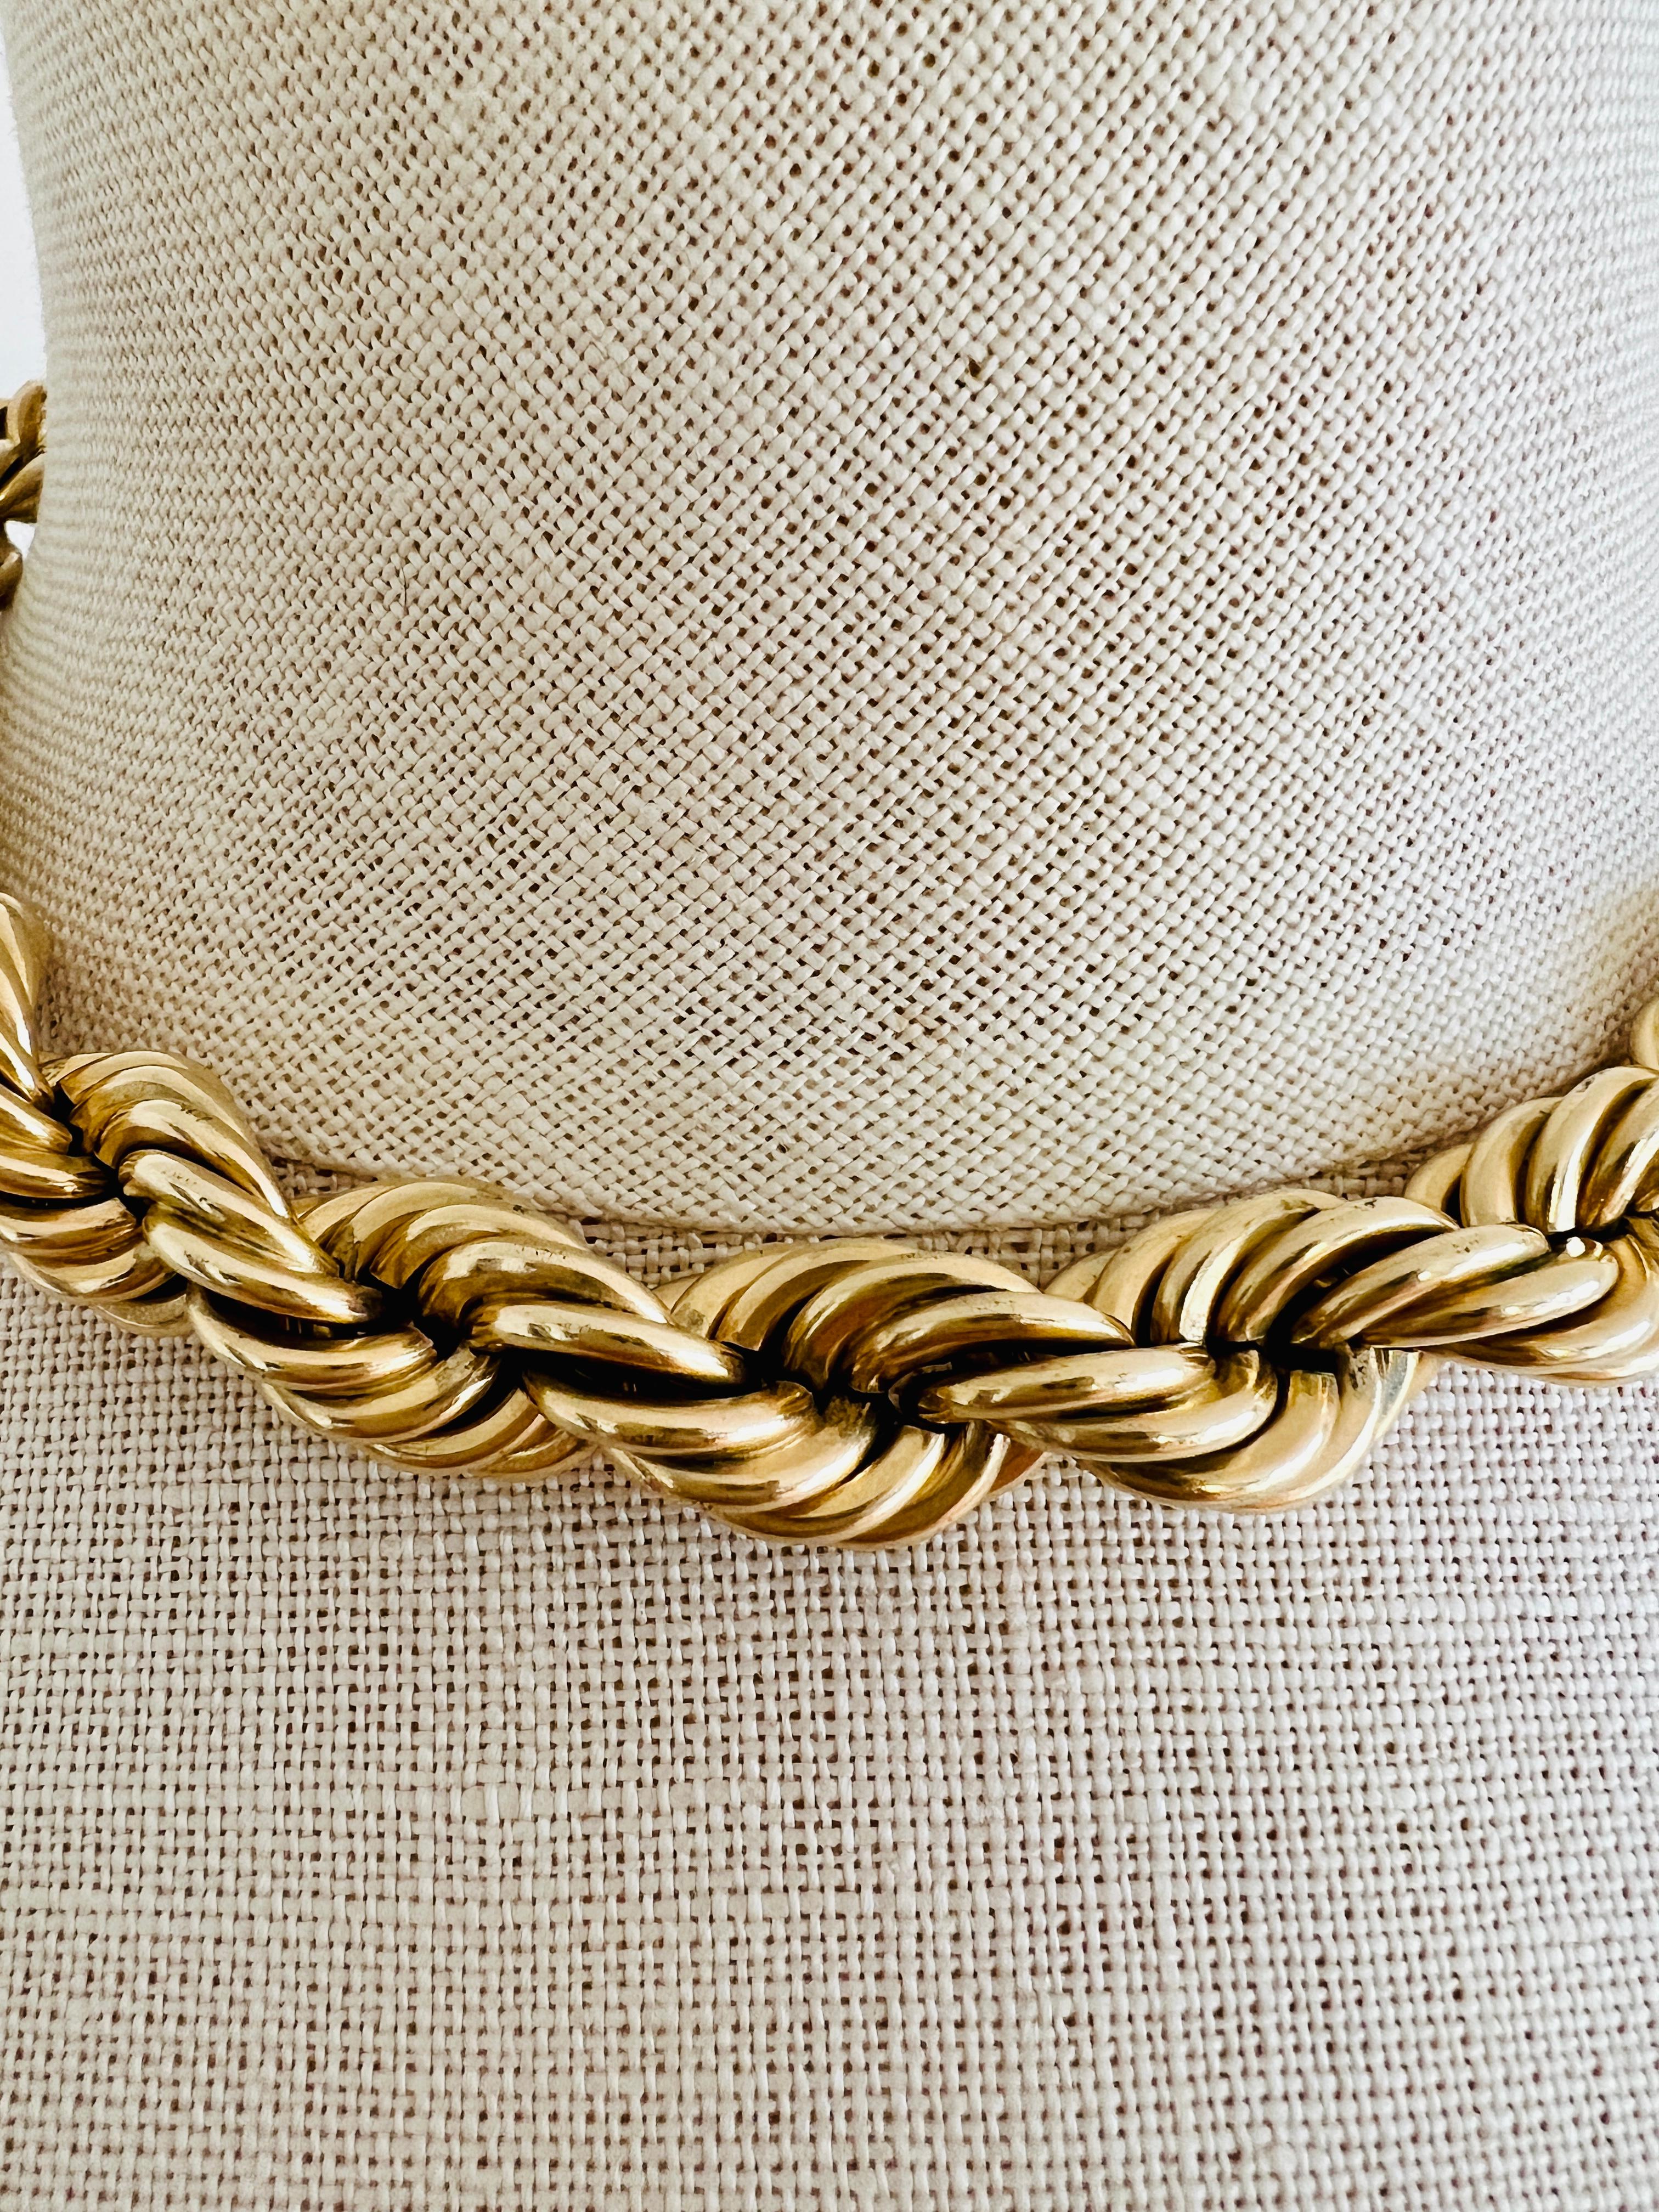 Contemporary 11 MM 12k Gold Filled Rope Chain Choker Necklace or Bracelet